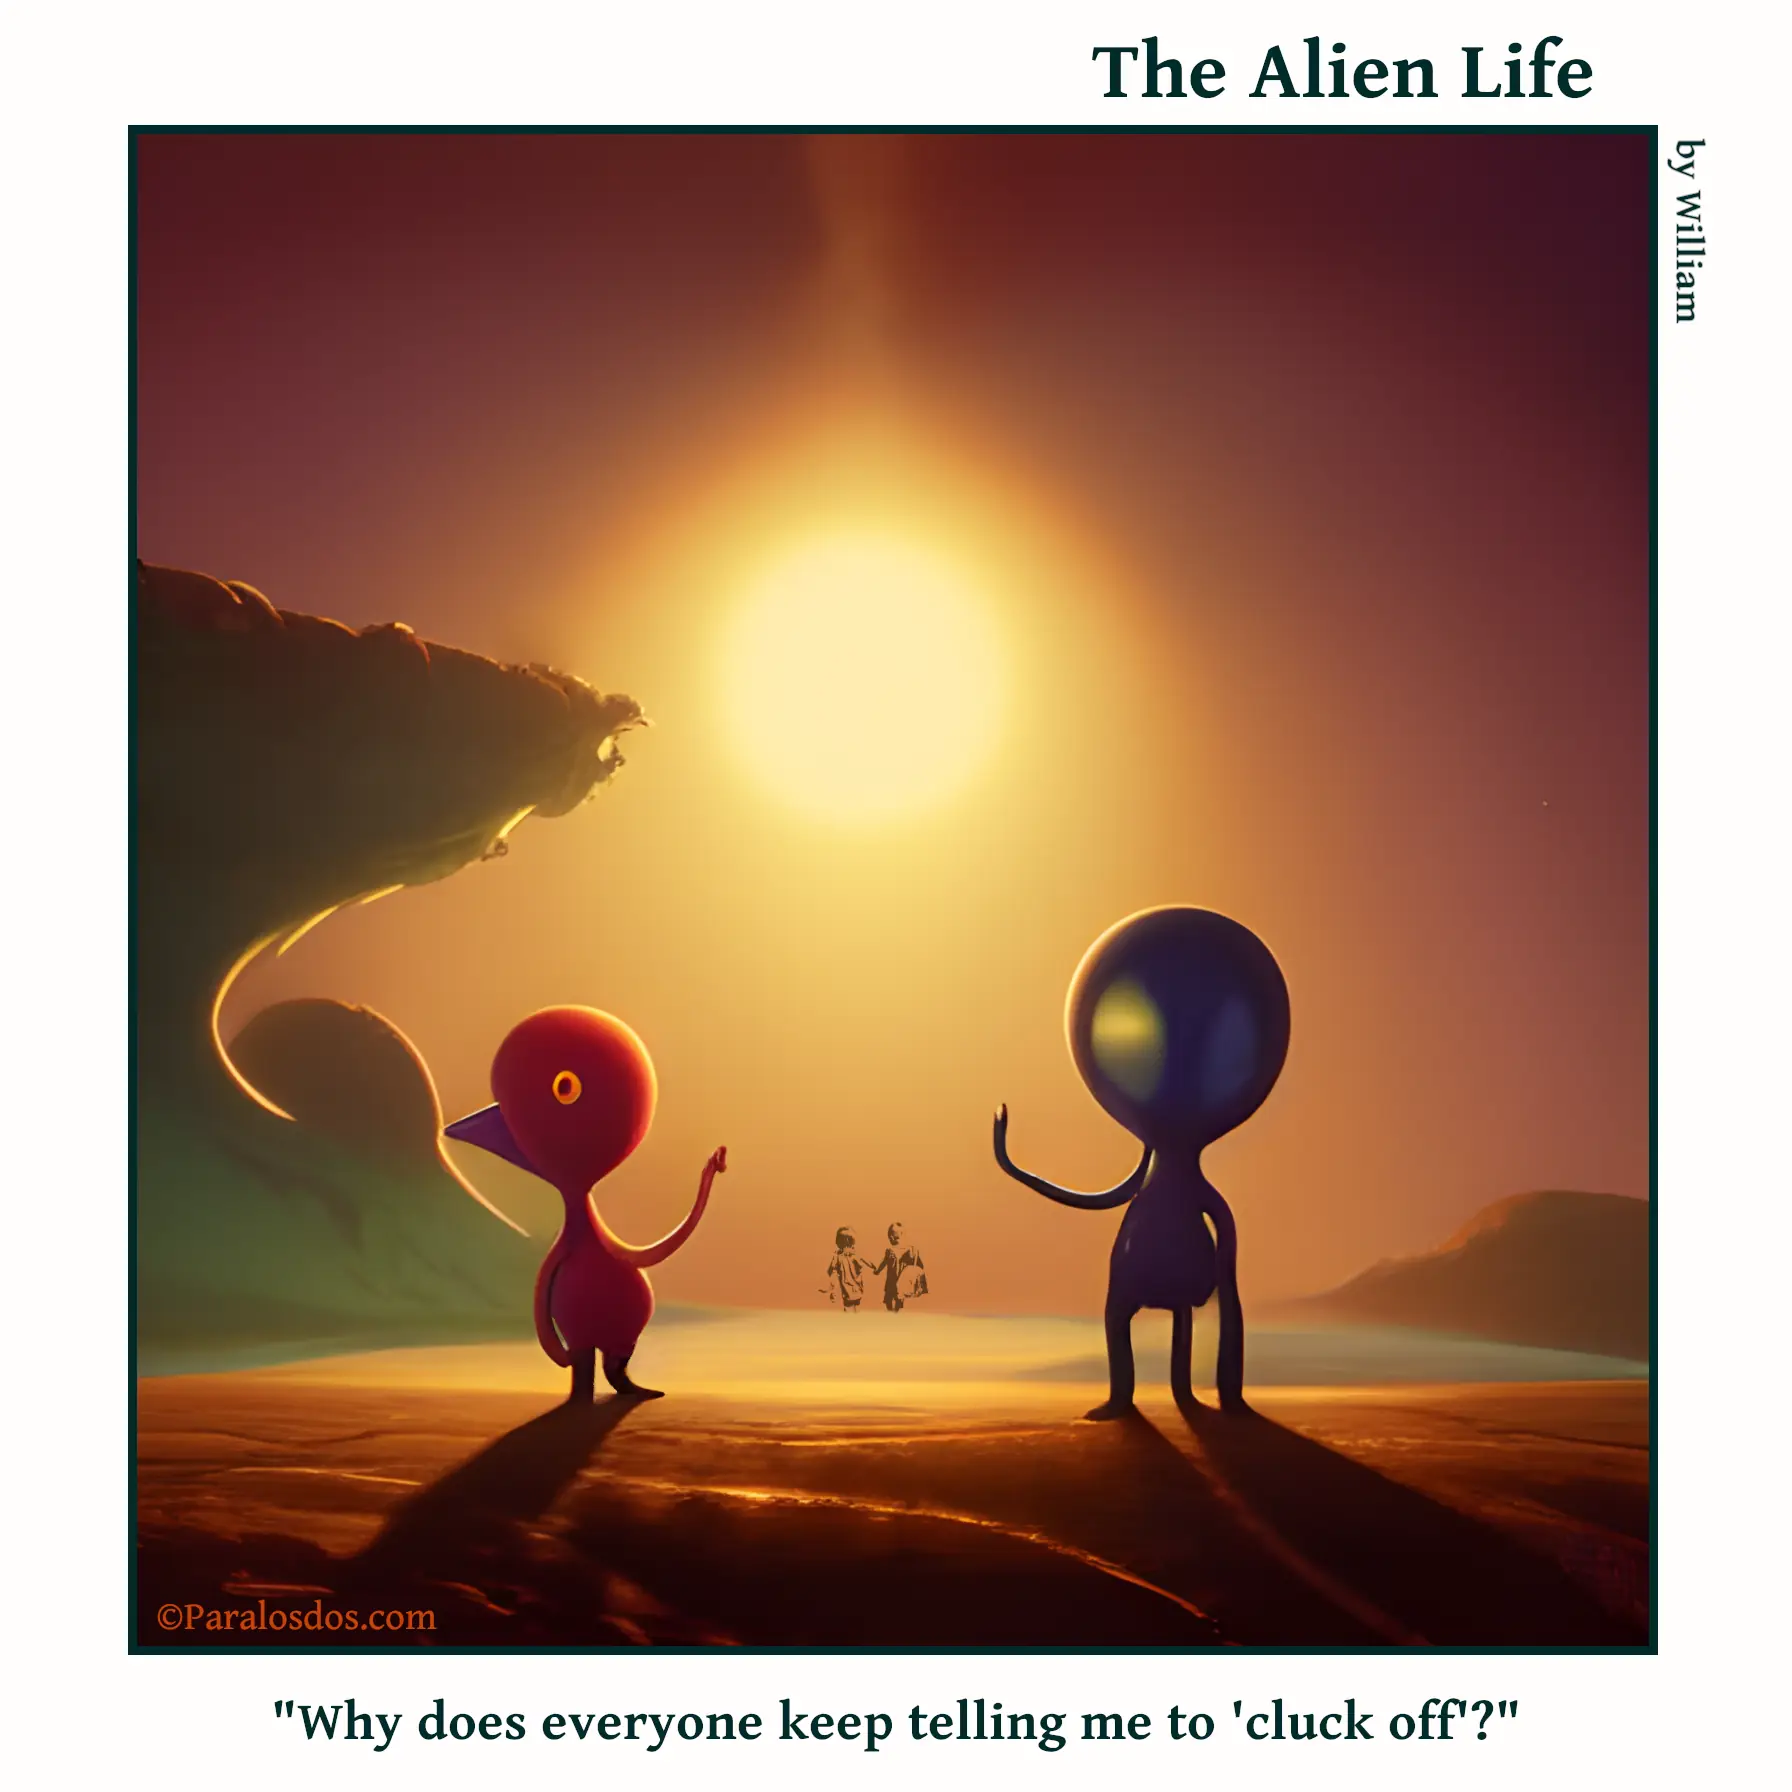 The Alien Life, one panel Comic. An alien that has a kind of chicken head is walking away from another alien. The caption reads: "Why does everyone keep telling me to 'cluck off'?"